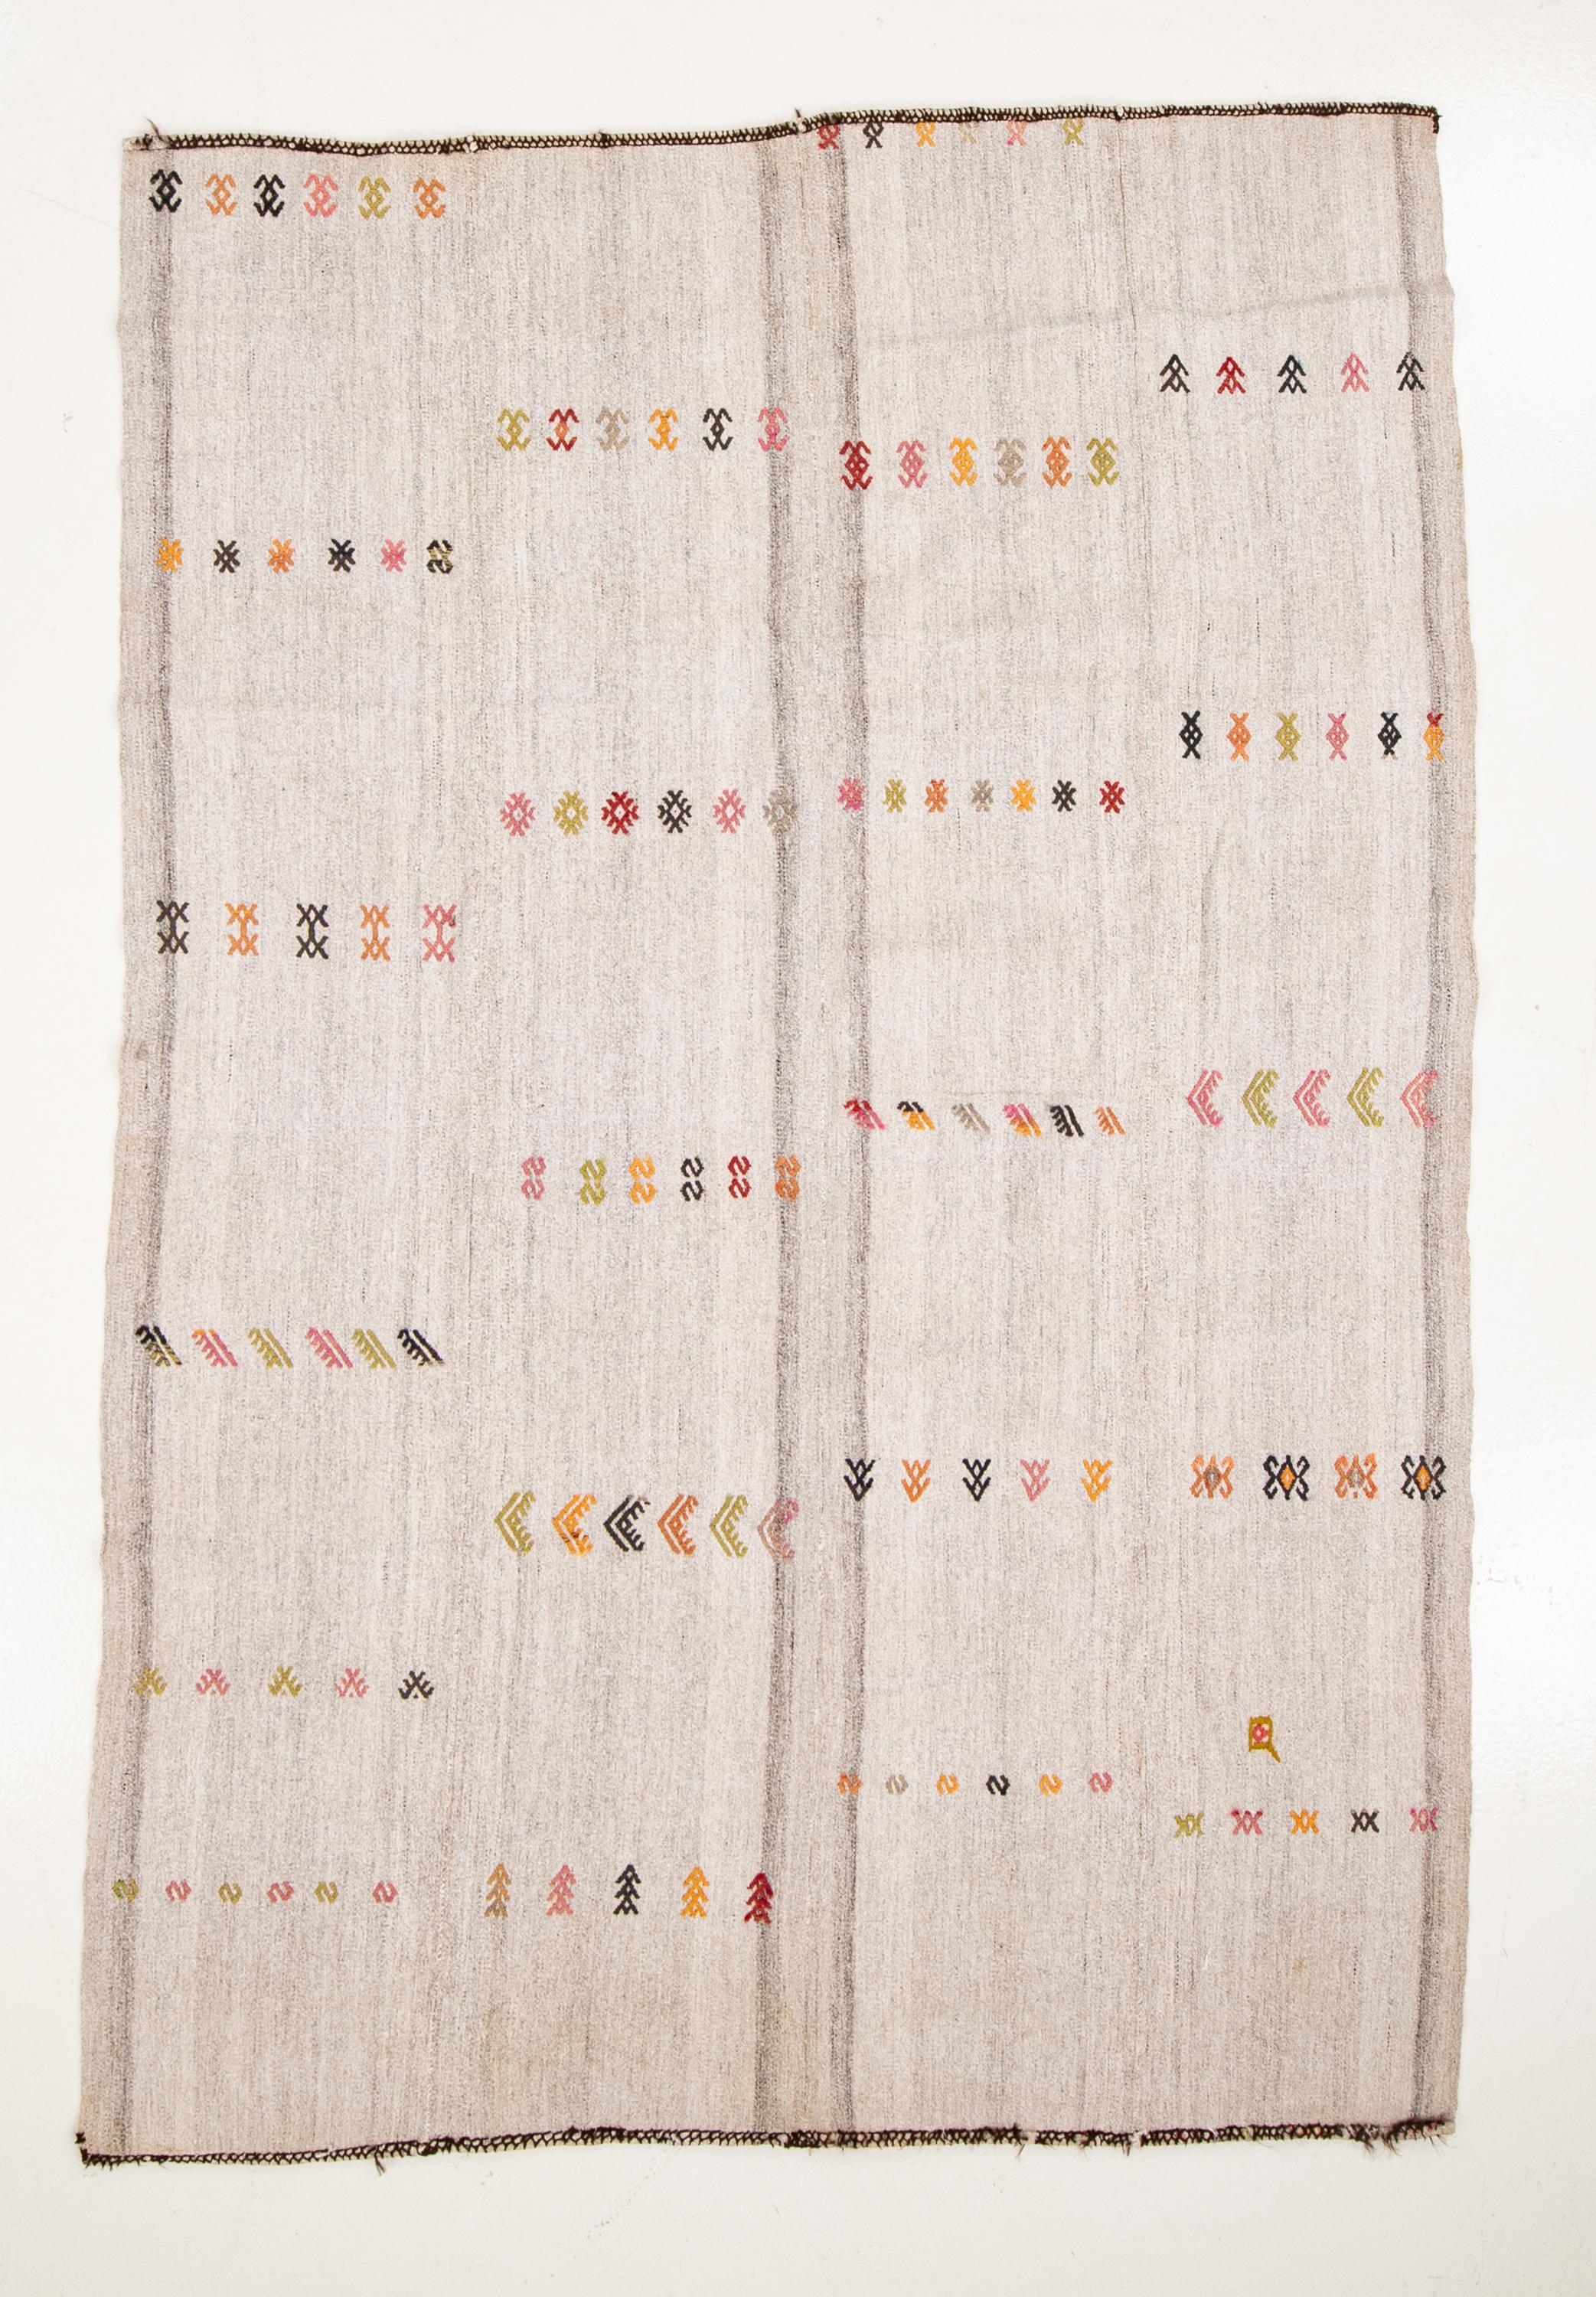 Anatolian Kilim, Cotton and Goat Hair Mix, 1960s For Sale 1